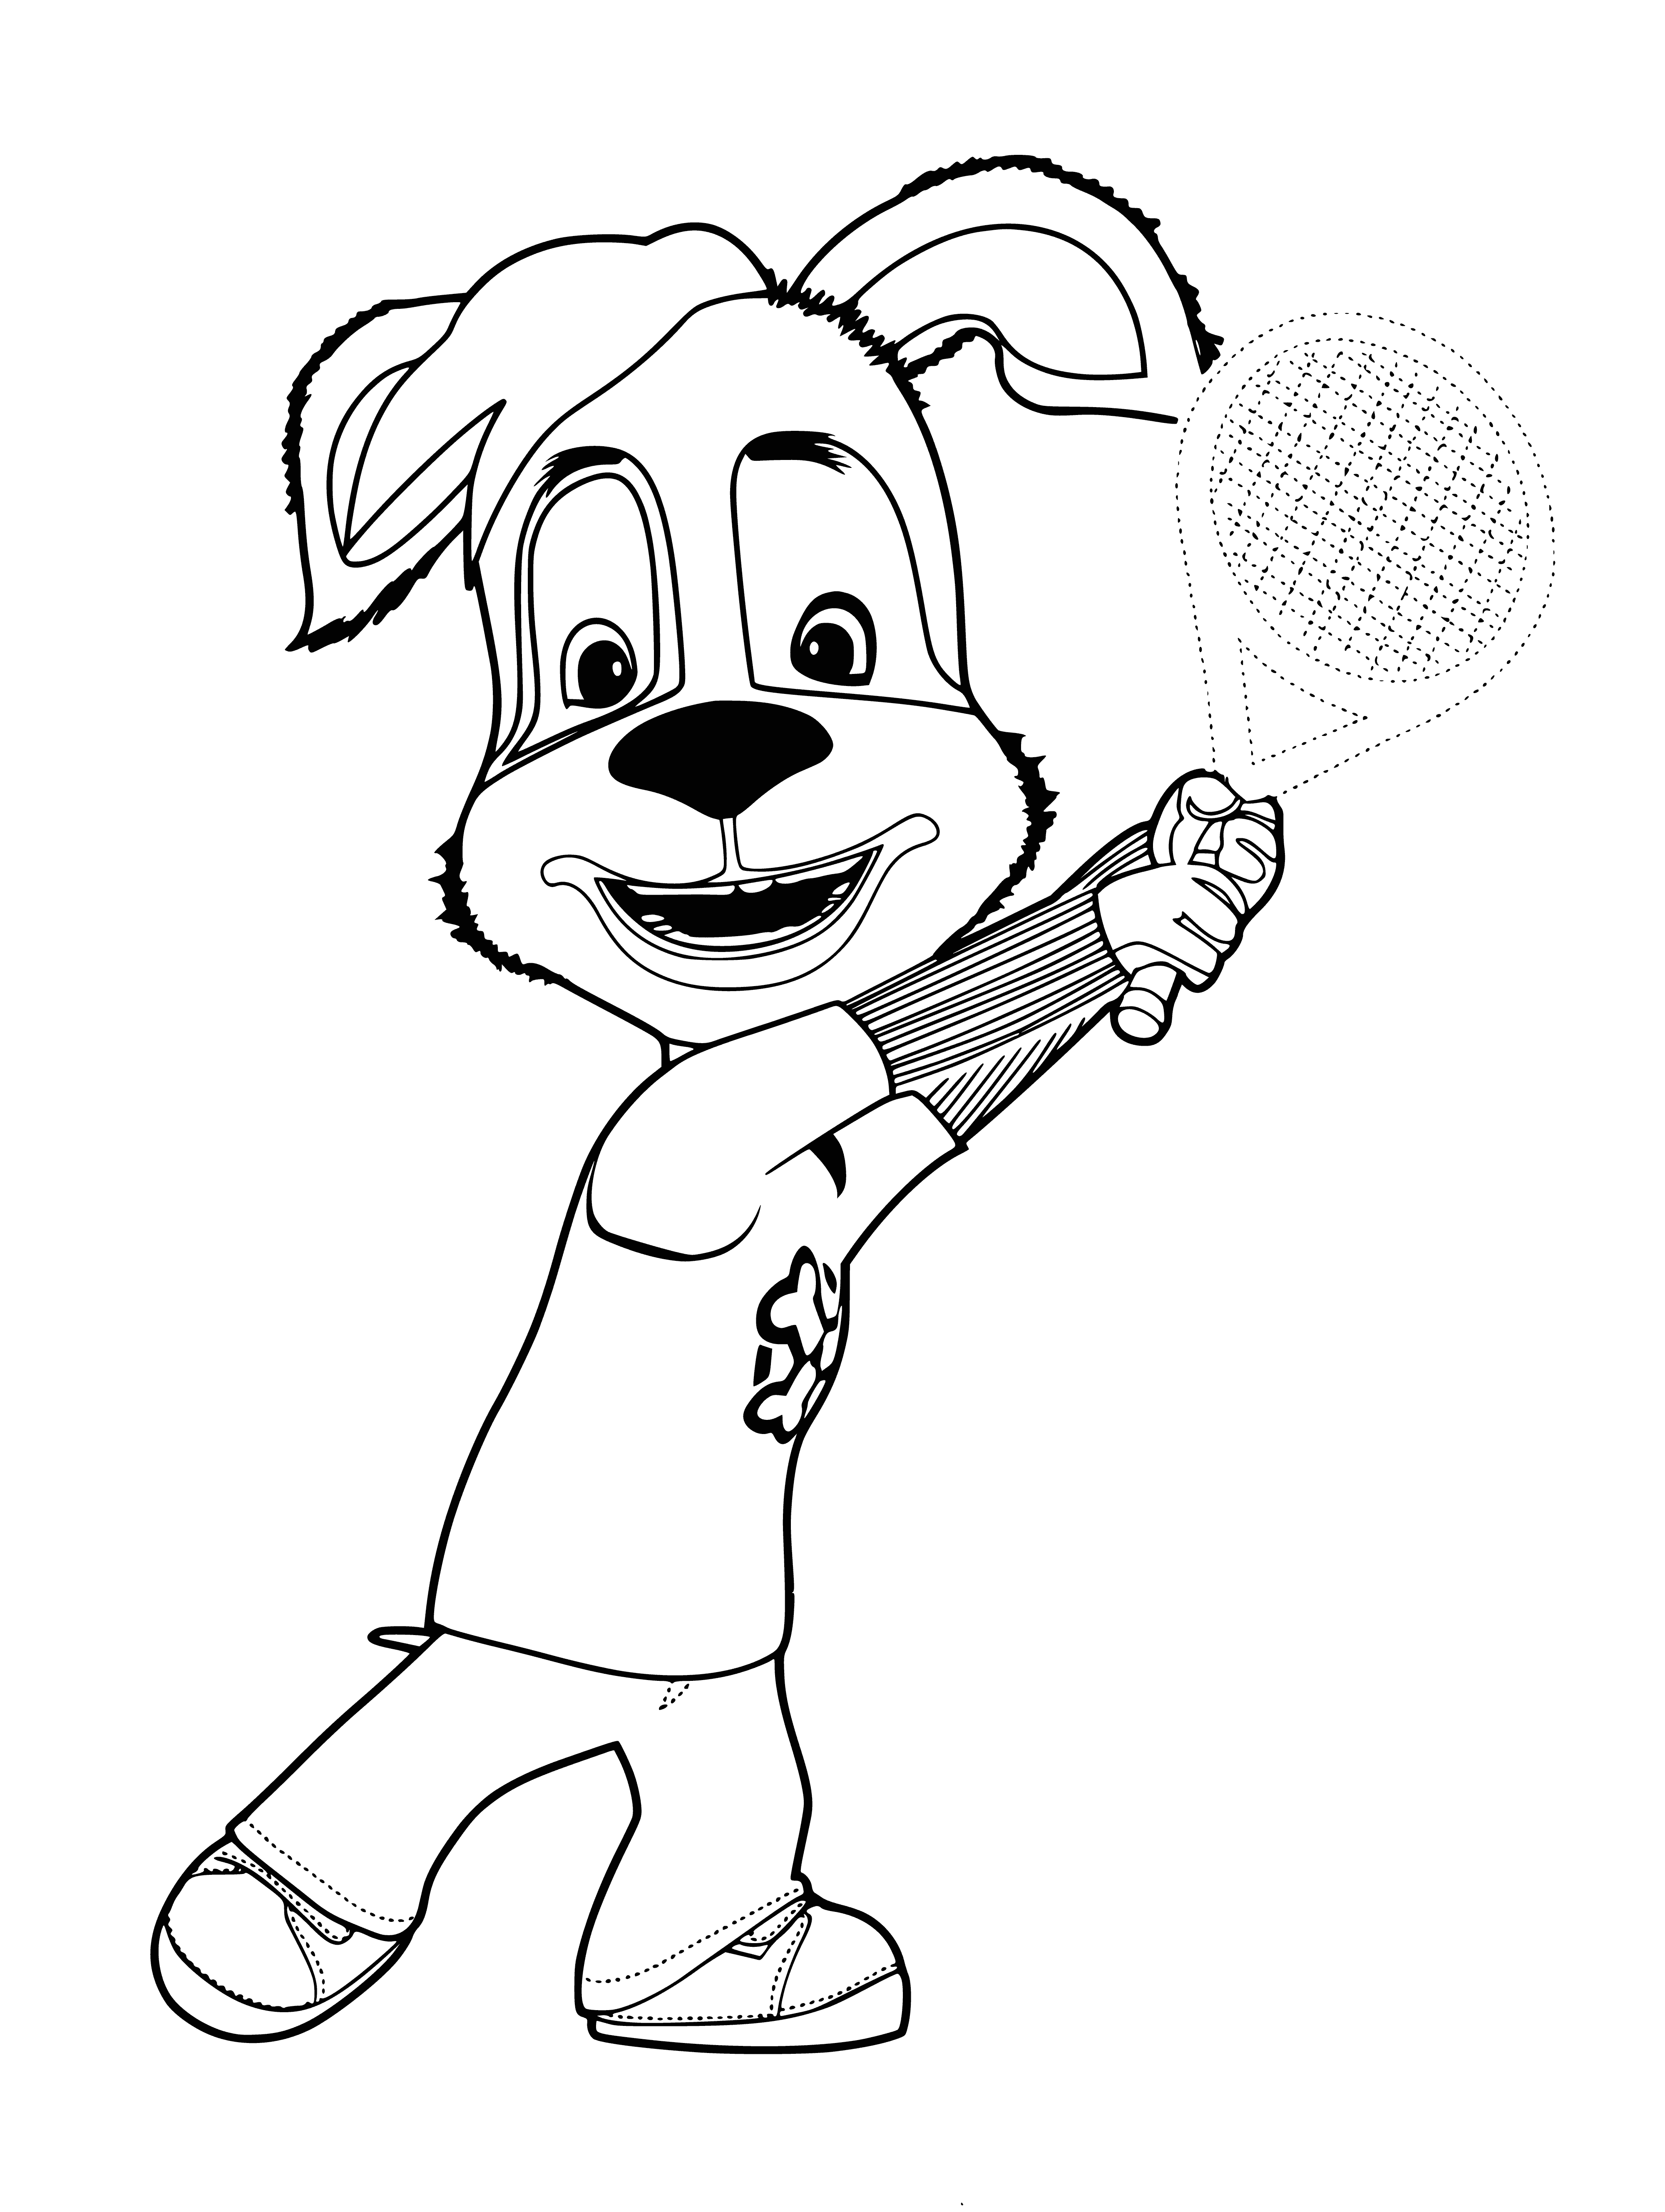 coloring page: Boy playing tennis on court in white shirt/shorts, brown hair. Ready to hit some balls!